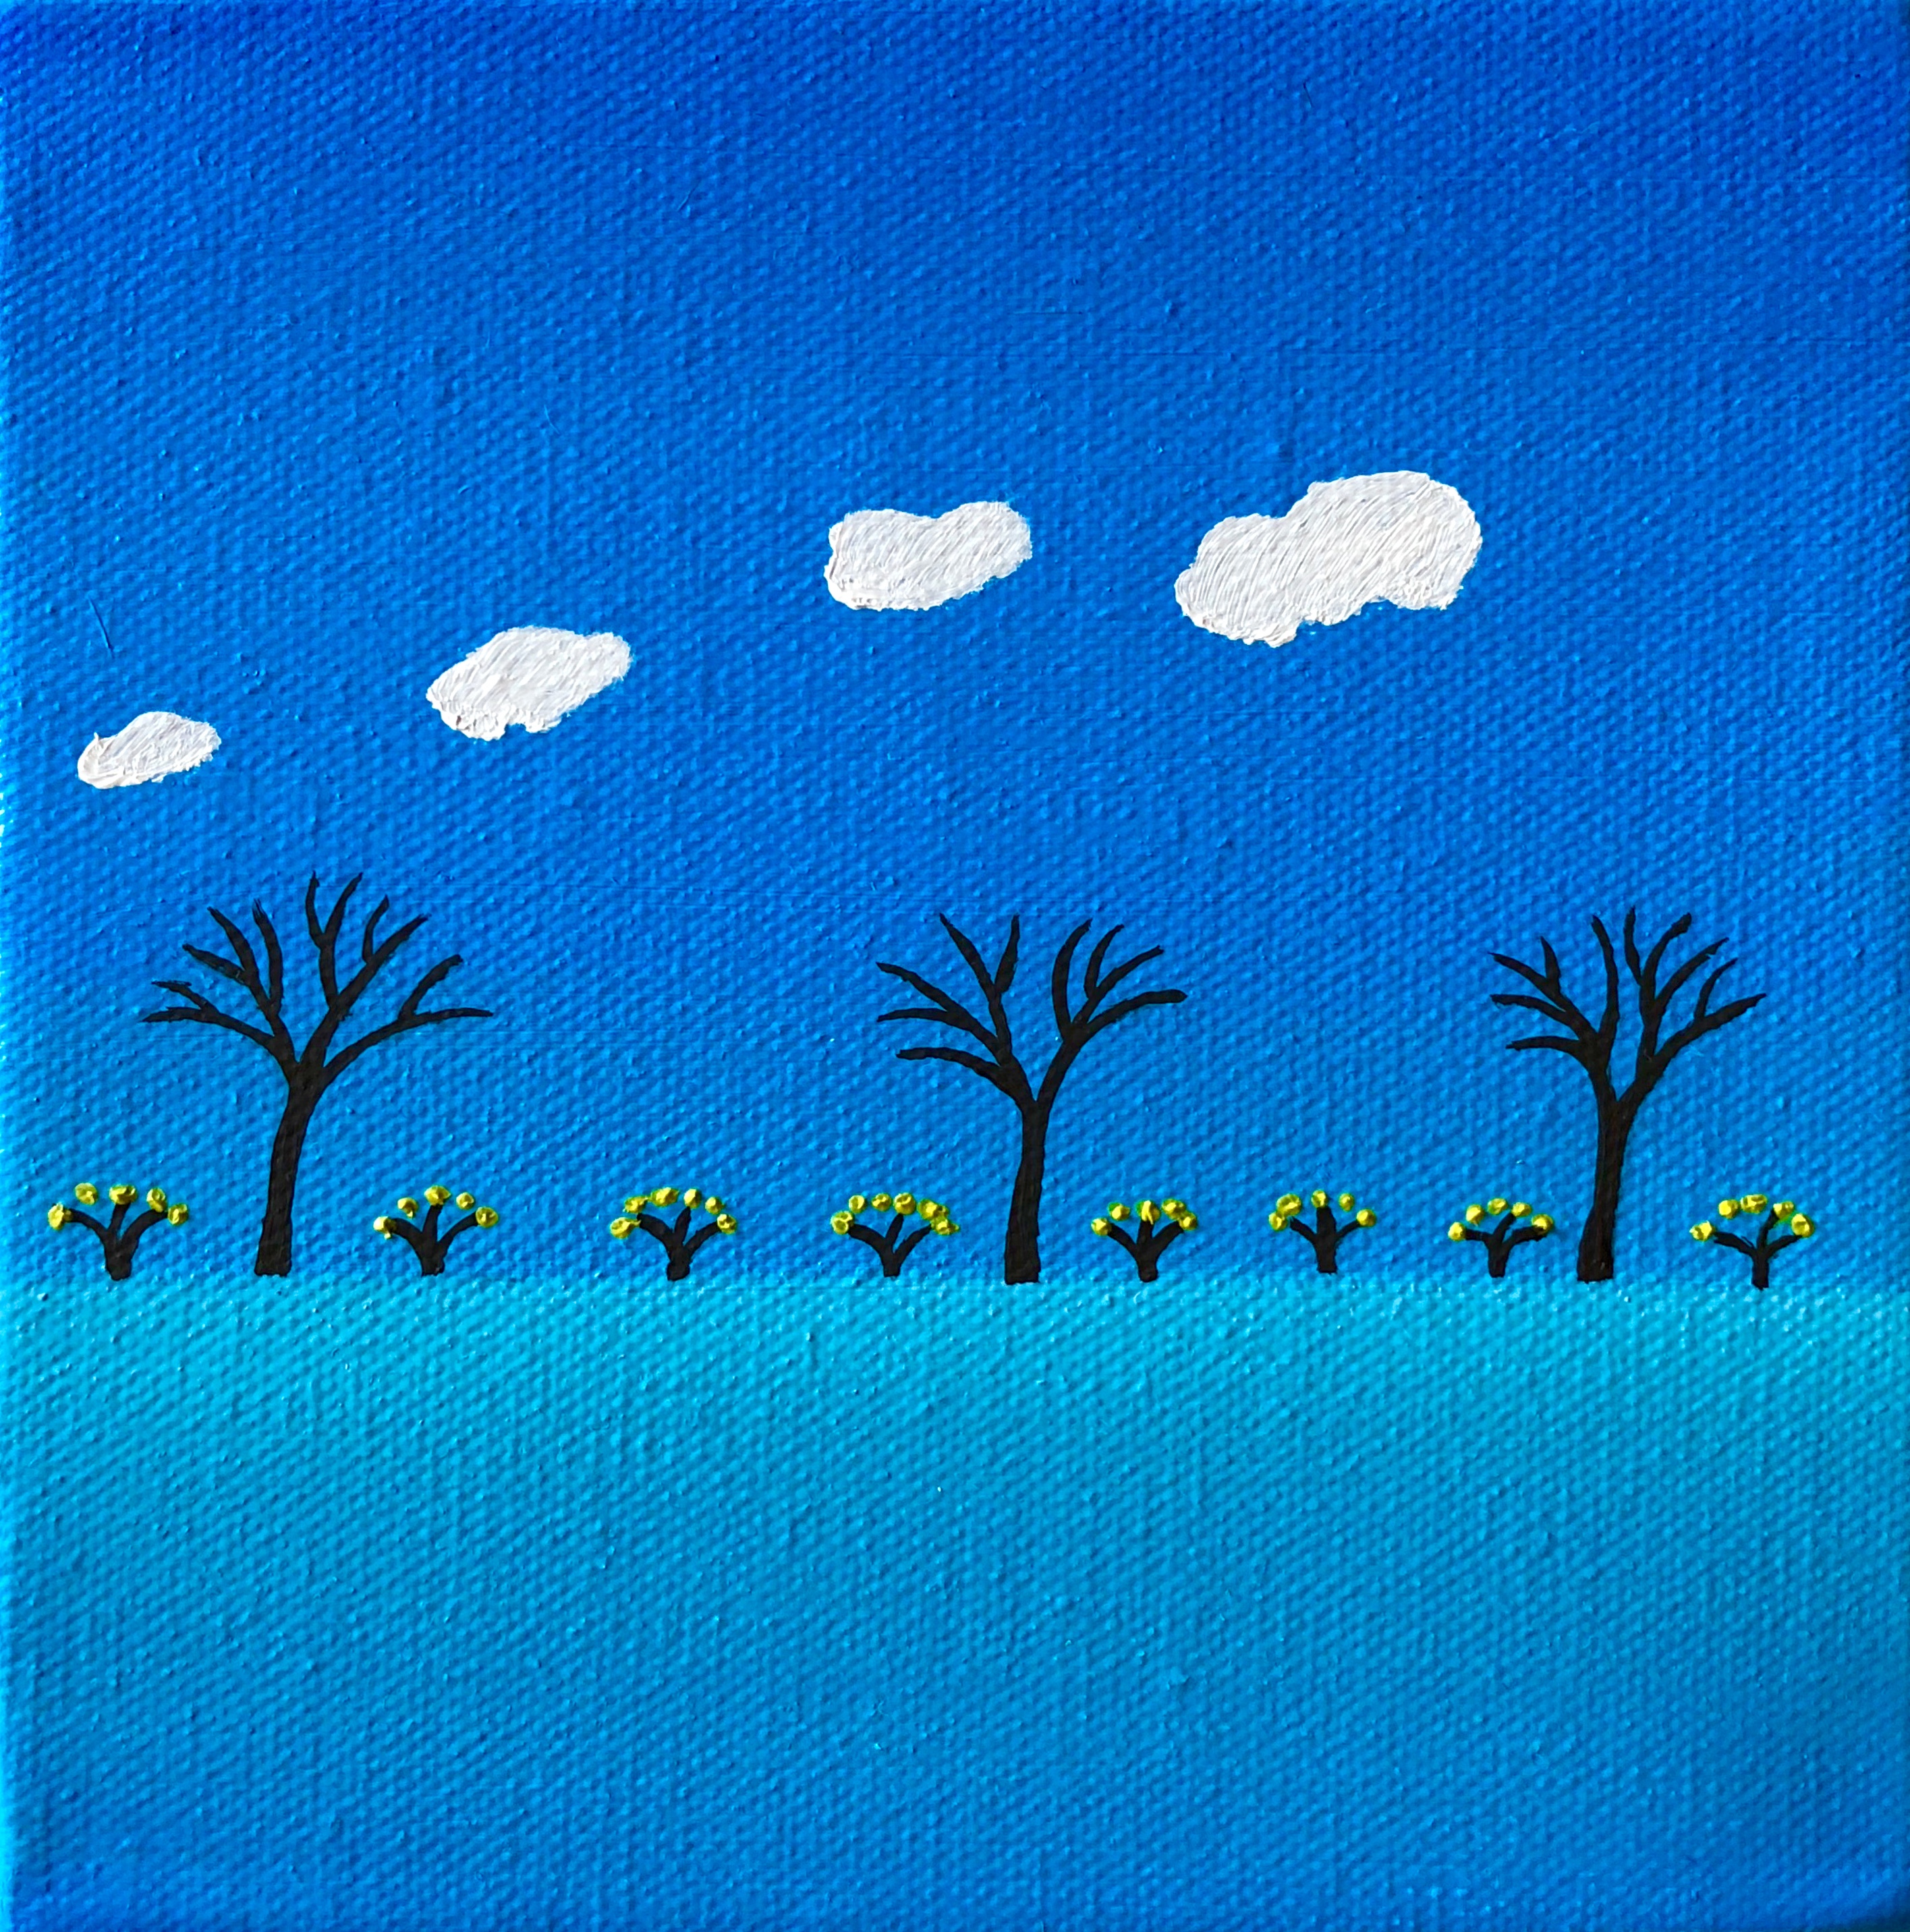 White Clouds-10 x 10 - Jah Roc Gallery - SOLD